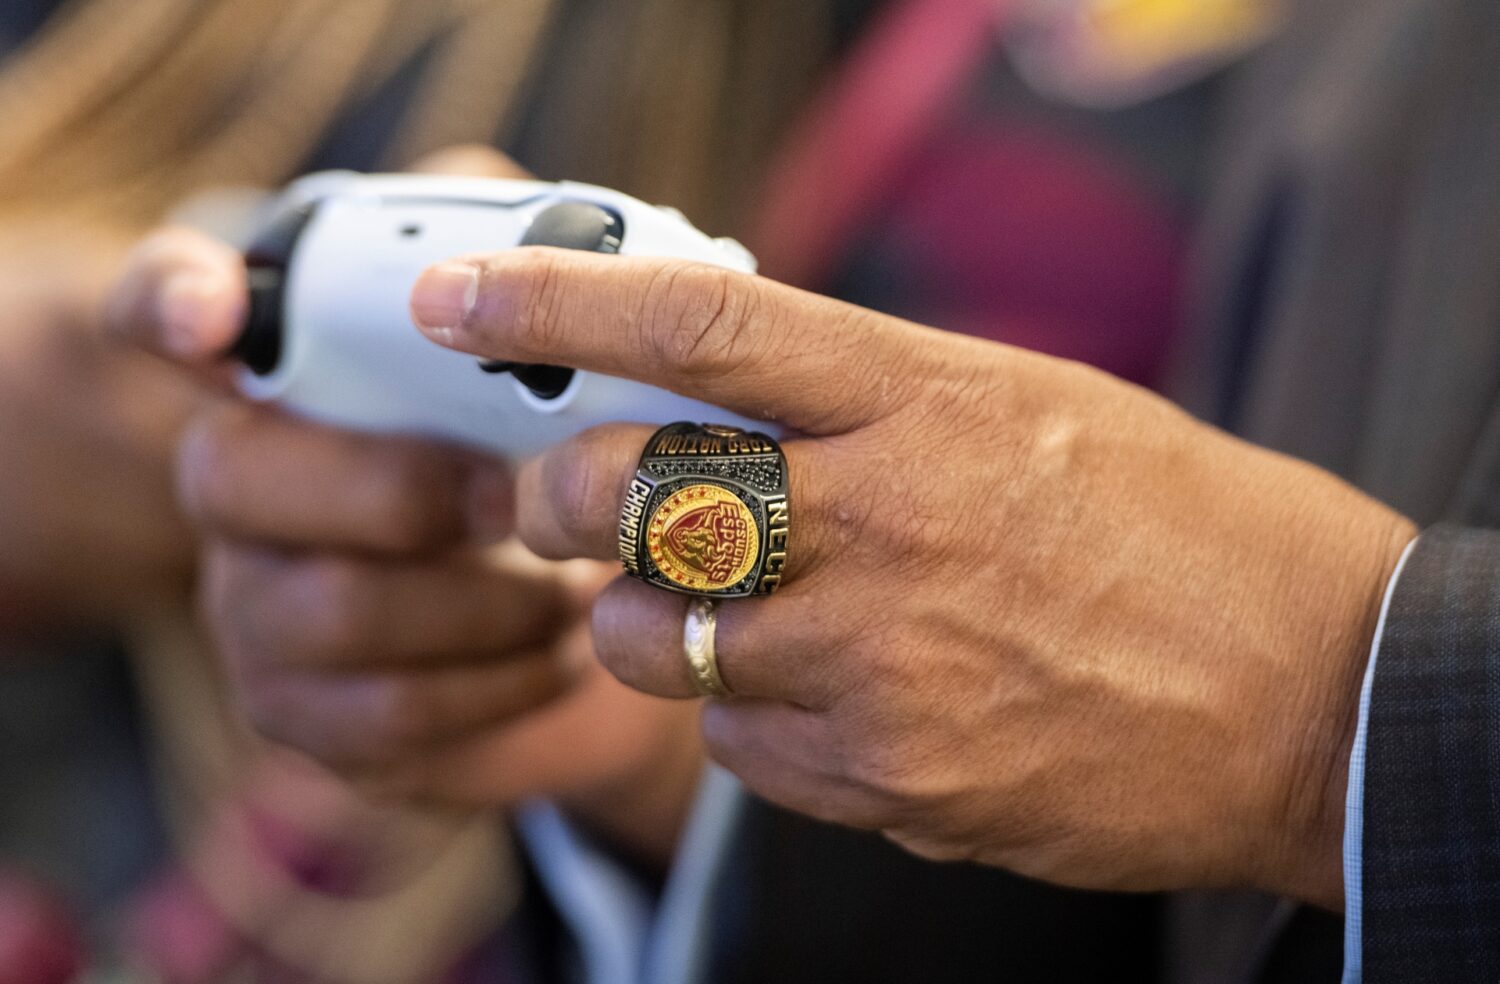 Someone holding a game controller, wearing an Esports championship ring.